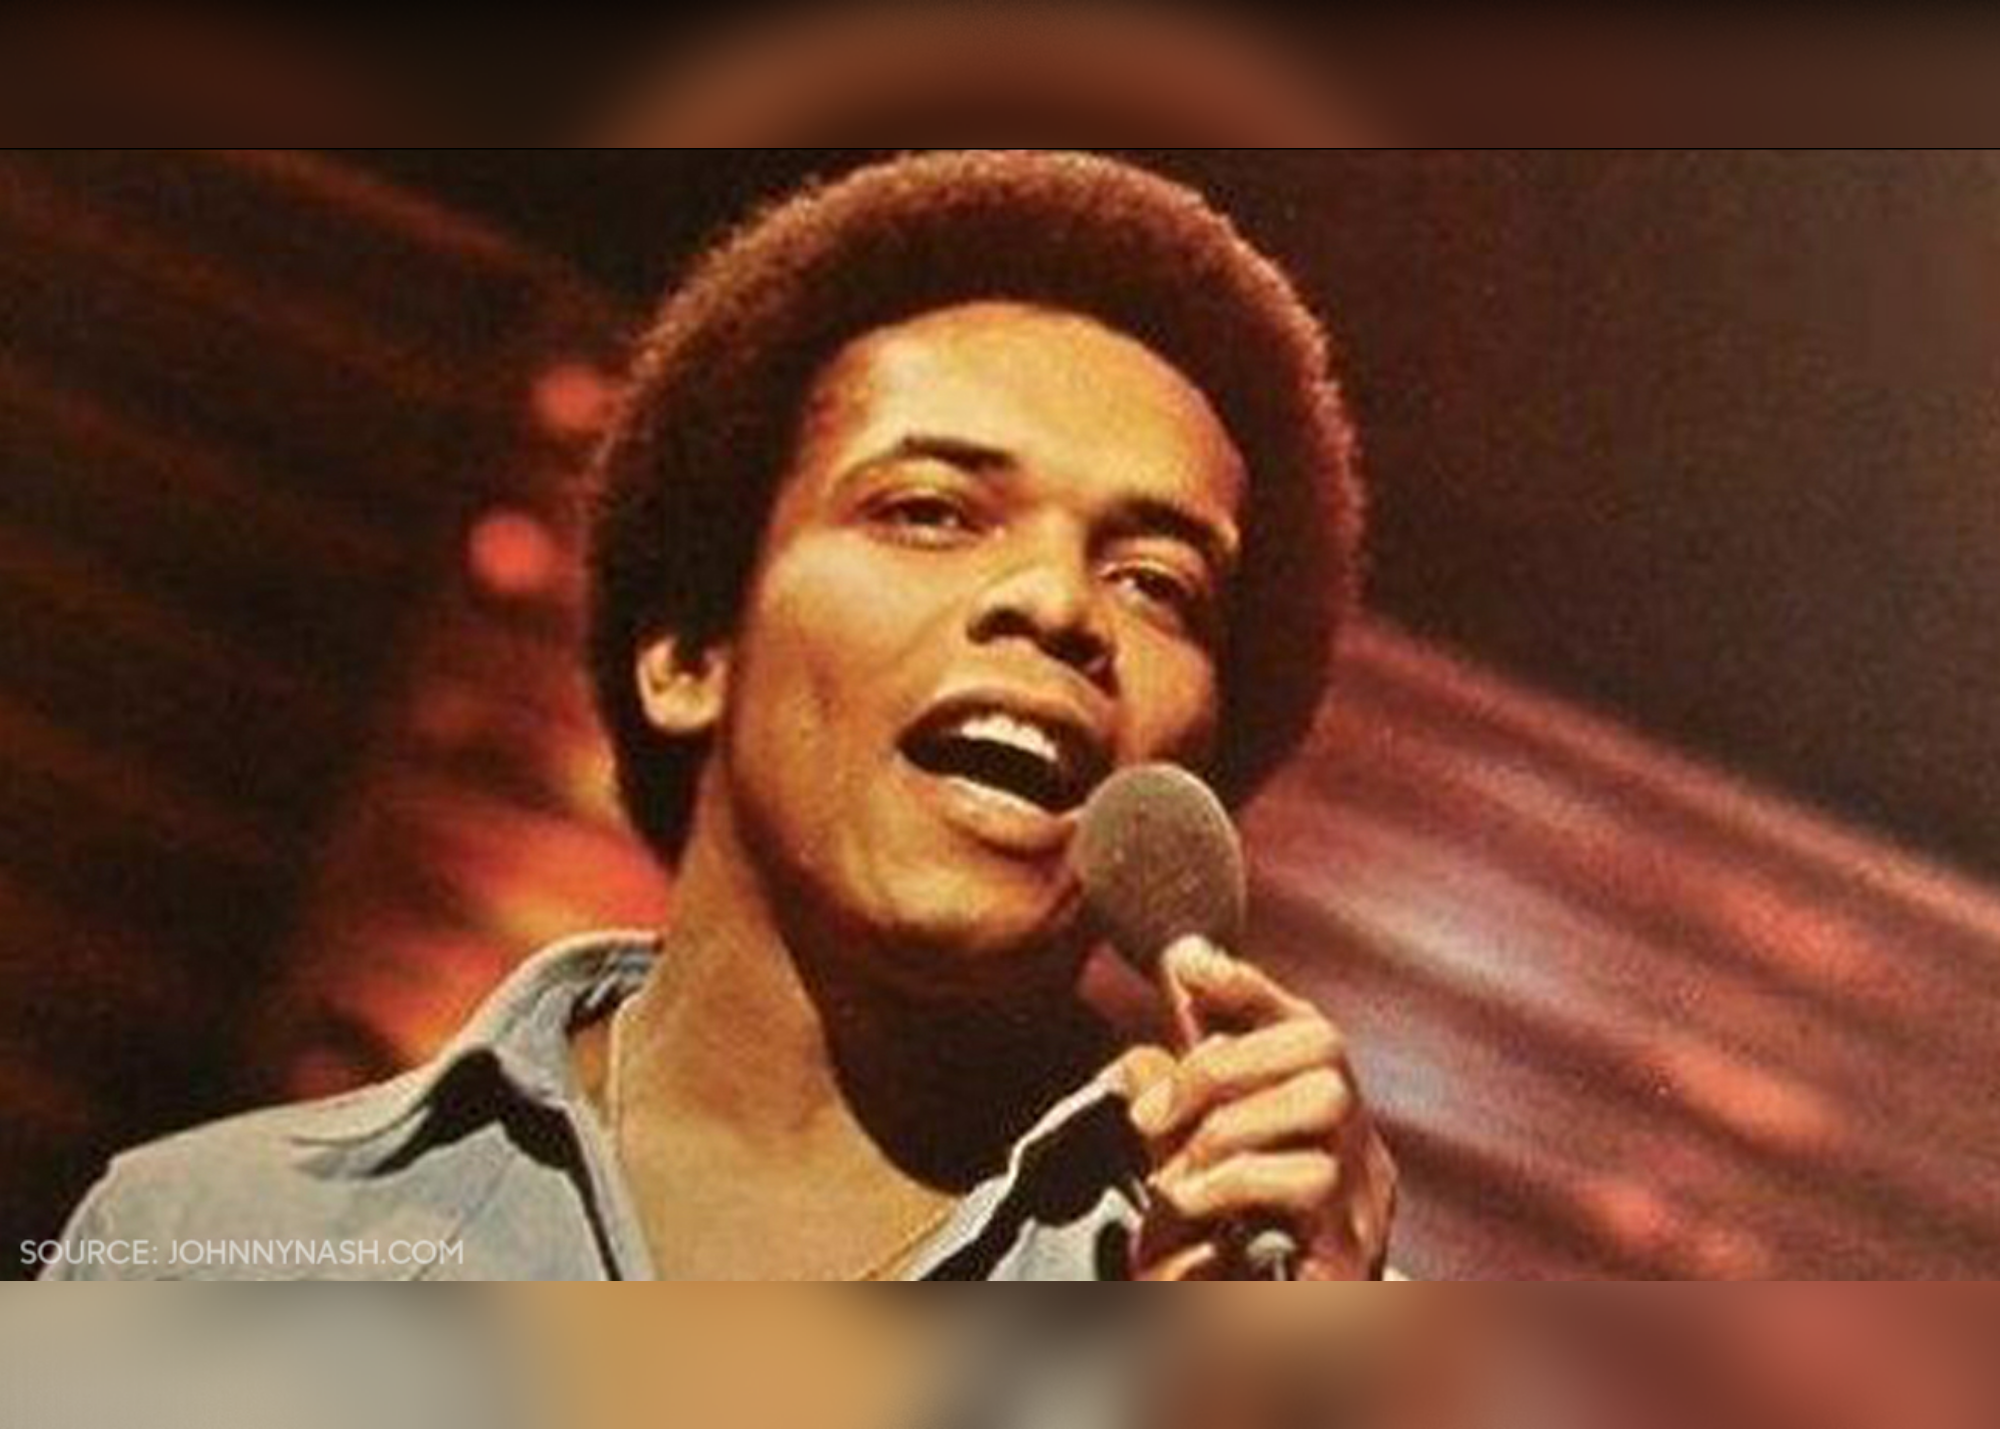 Remembering “I Can See Clearly Now” Singer Johnny Nash, Who Died At 80